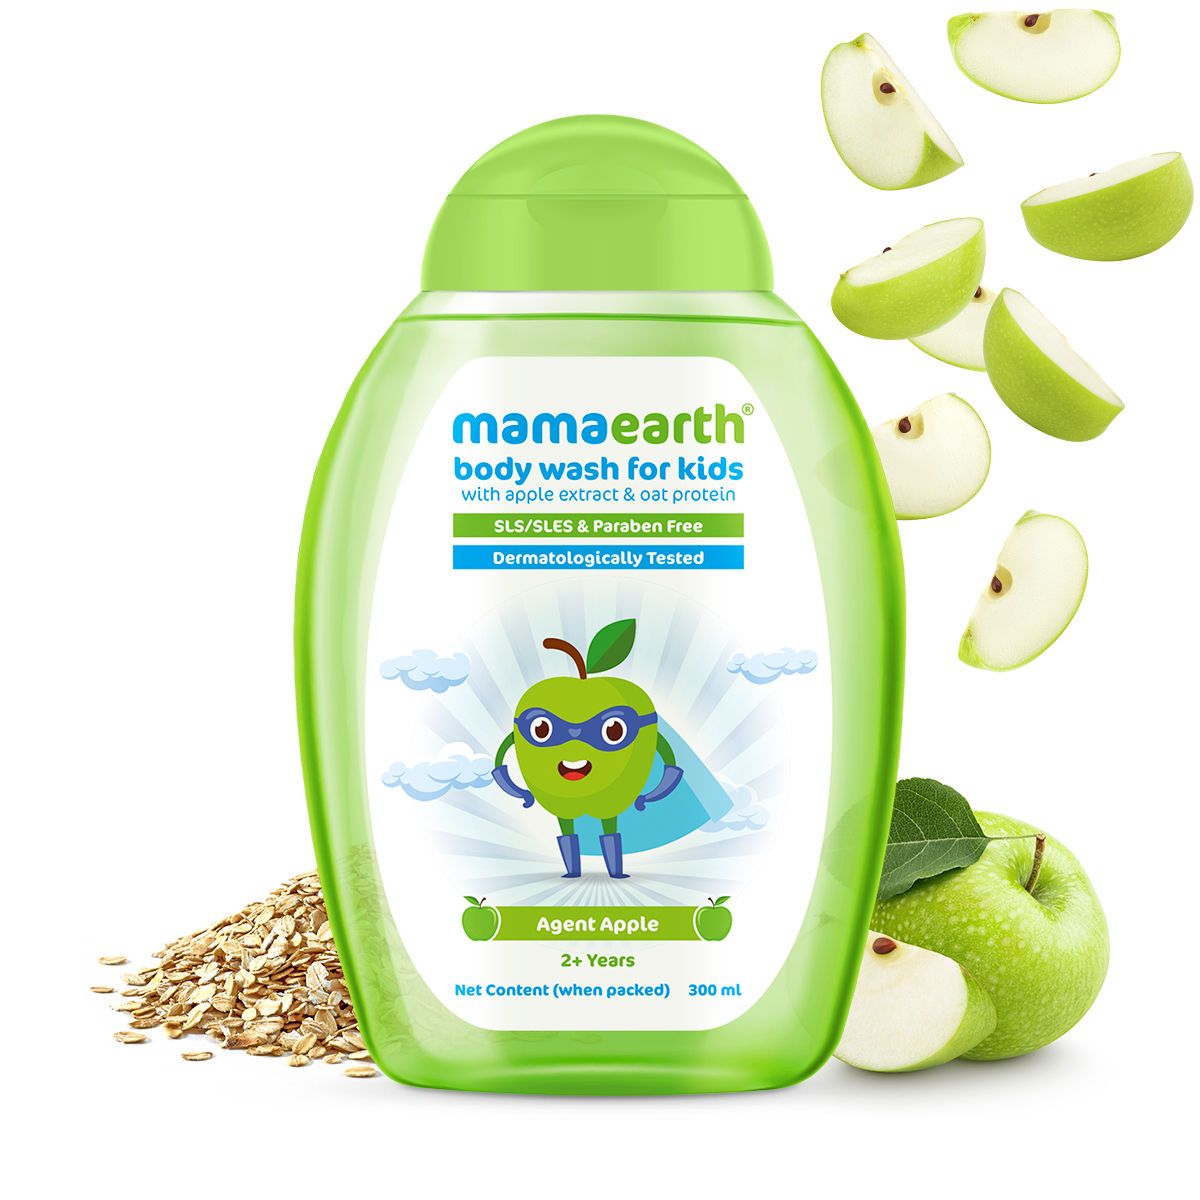 Mamaearth Agent Apple Body Wash for Kids with Apple & Oat Protein-300ml